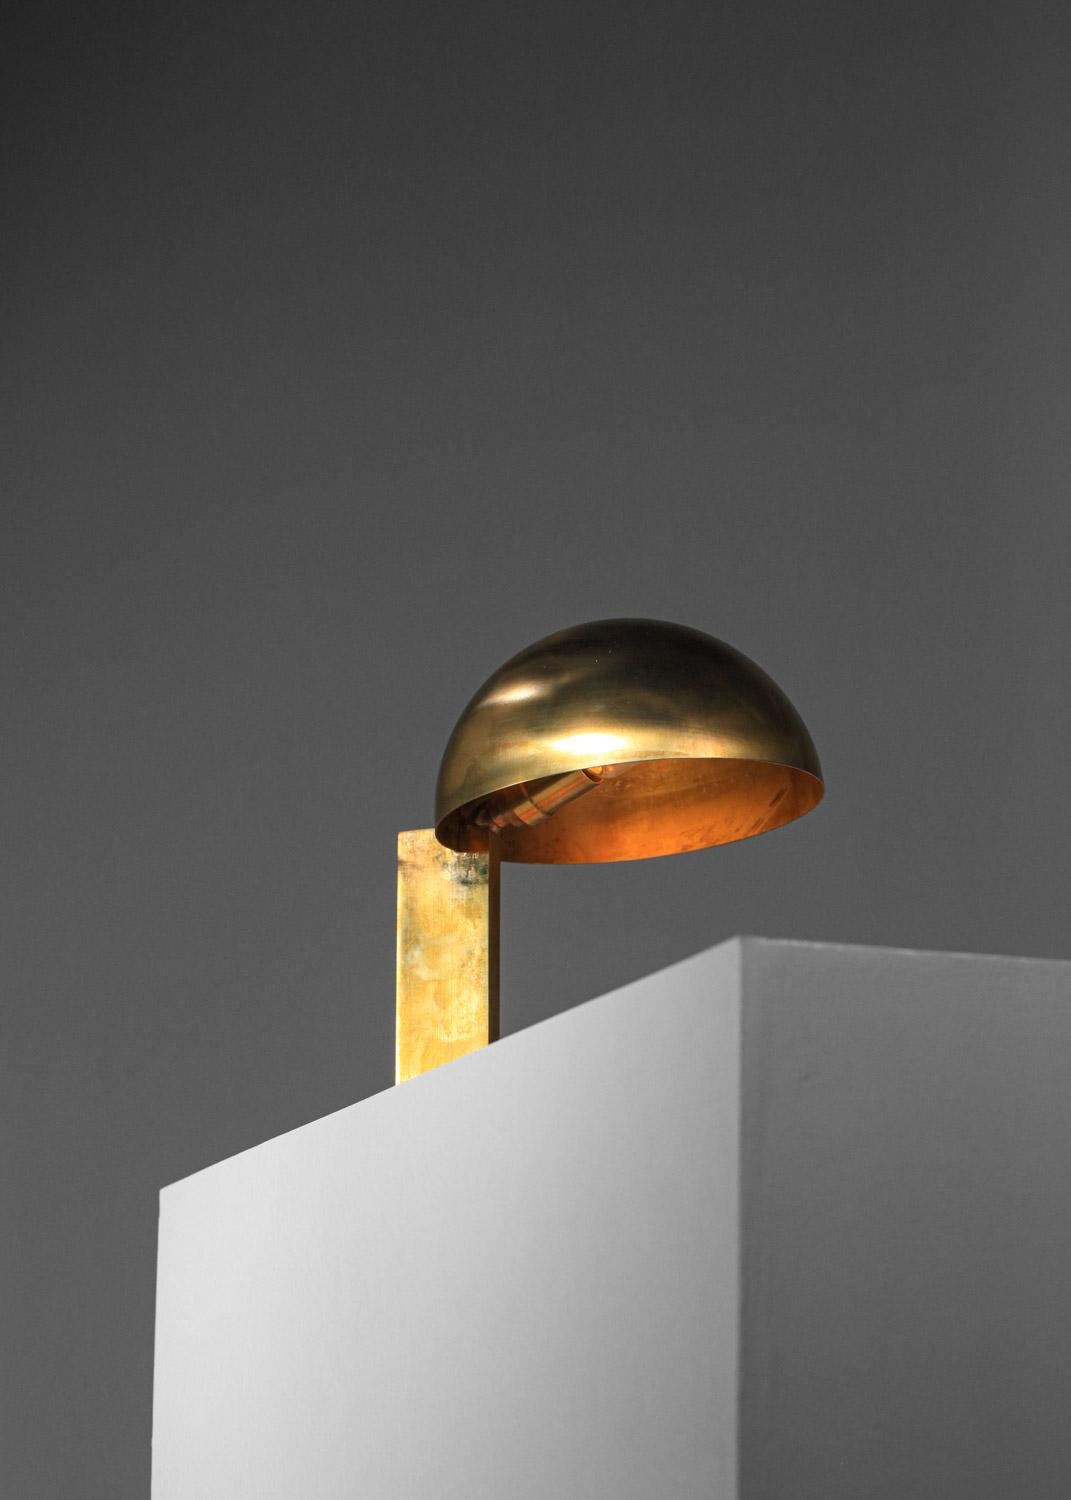 French Modern table lamp in solid brass 60's moderniste style by Danke studio  For Sale